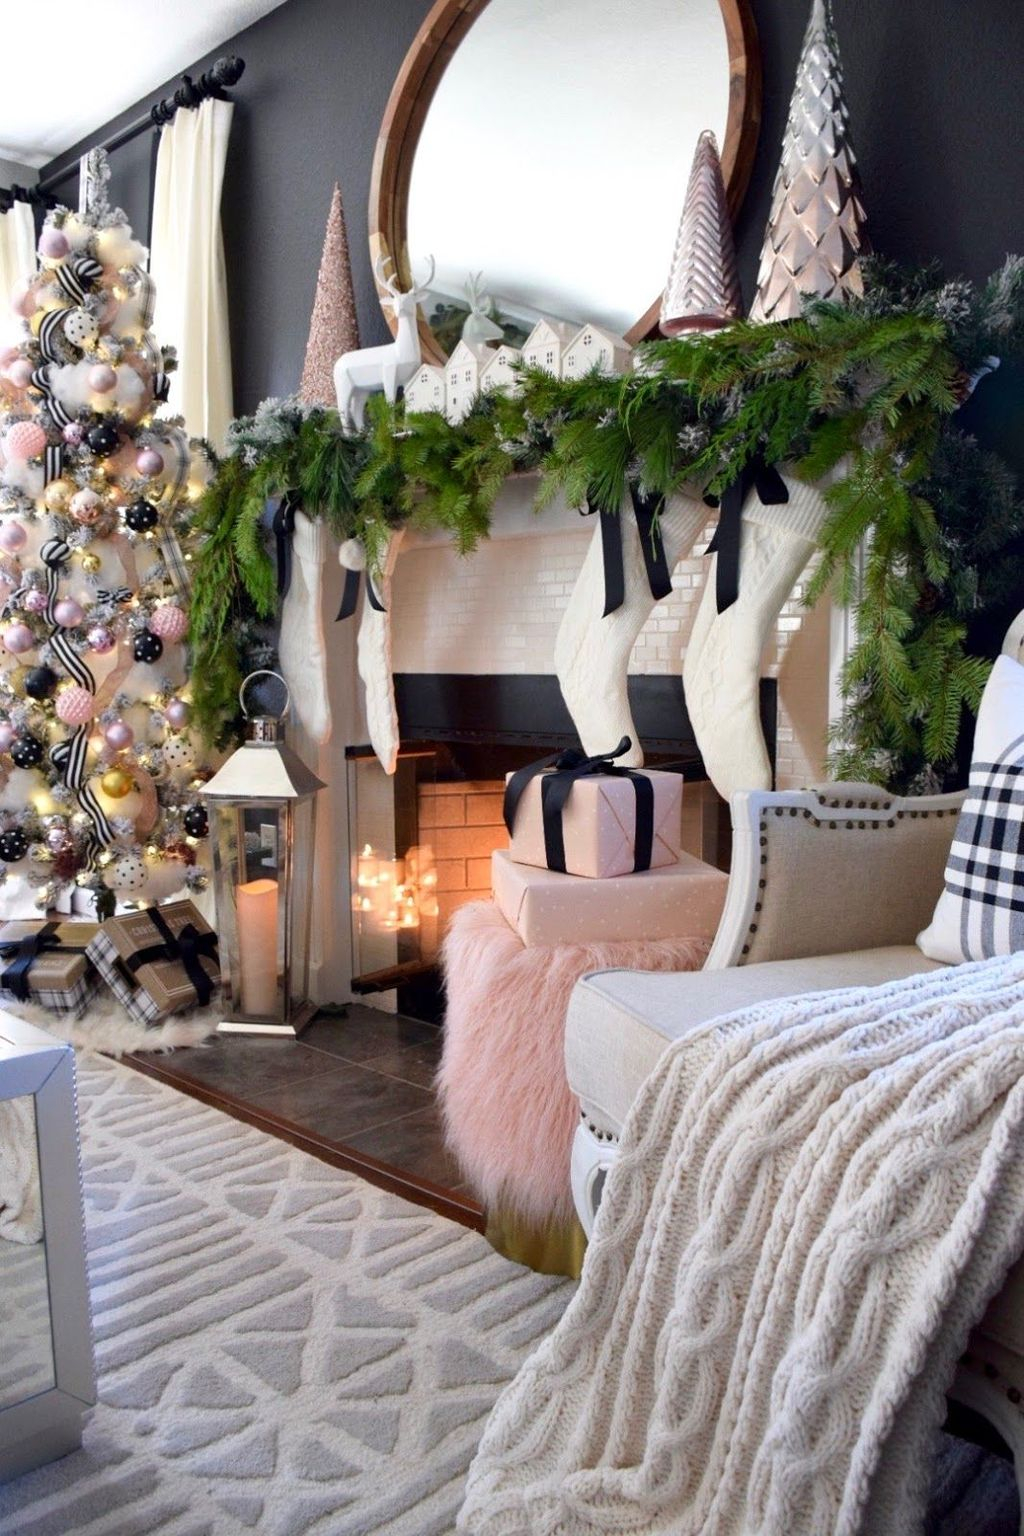 Fabulous Interior Design Ideas For Fall And Winter To Try Now24